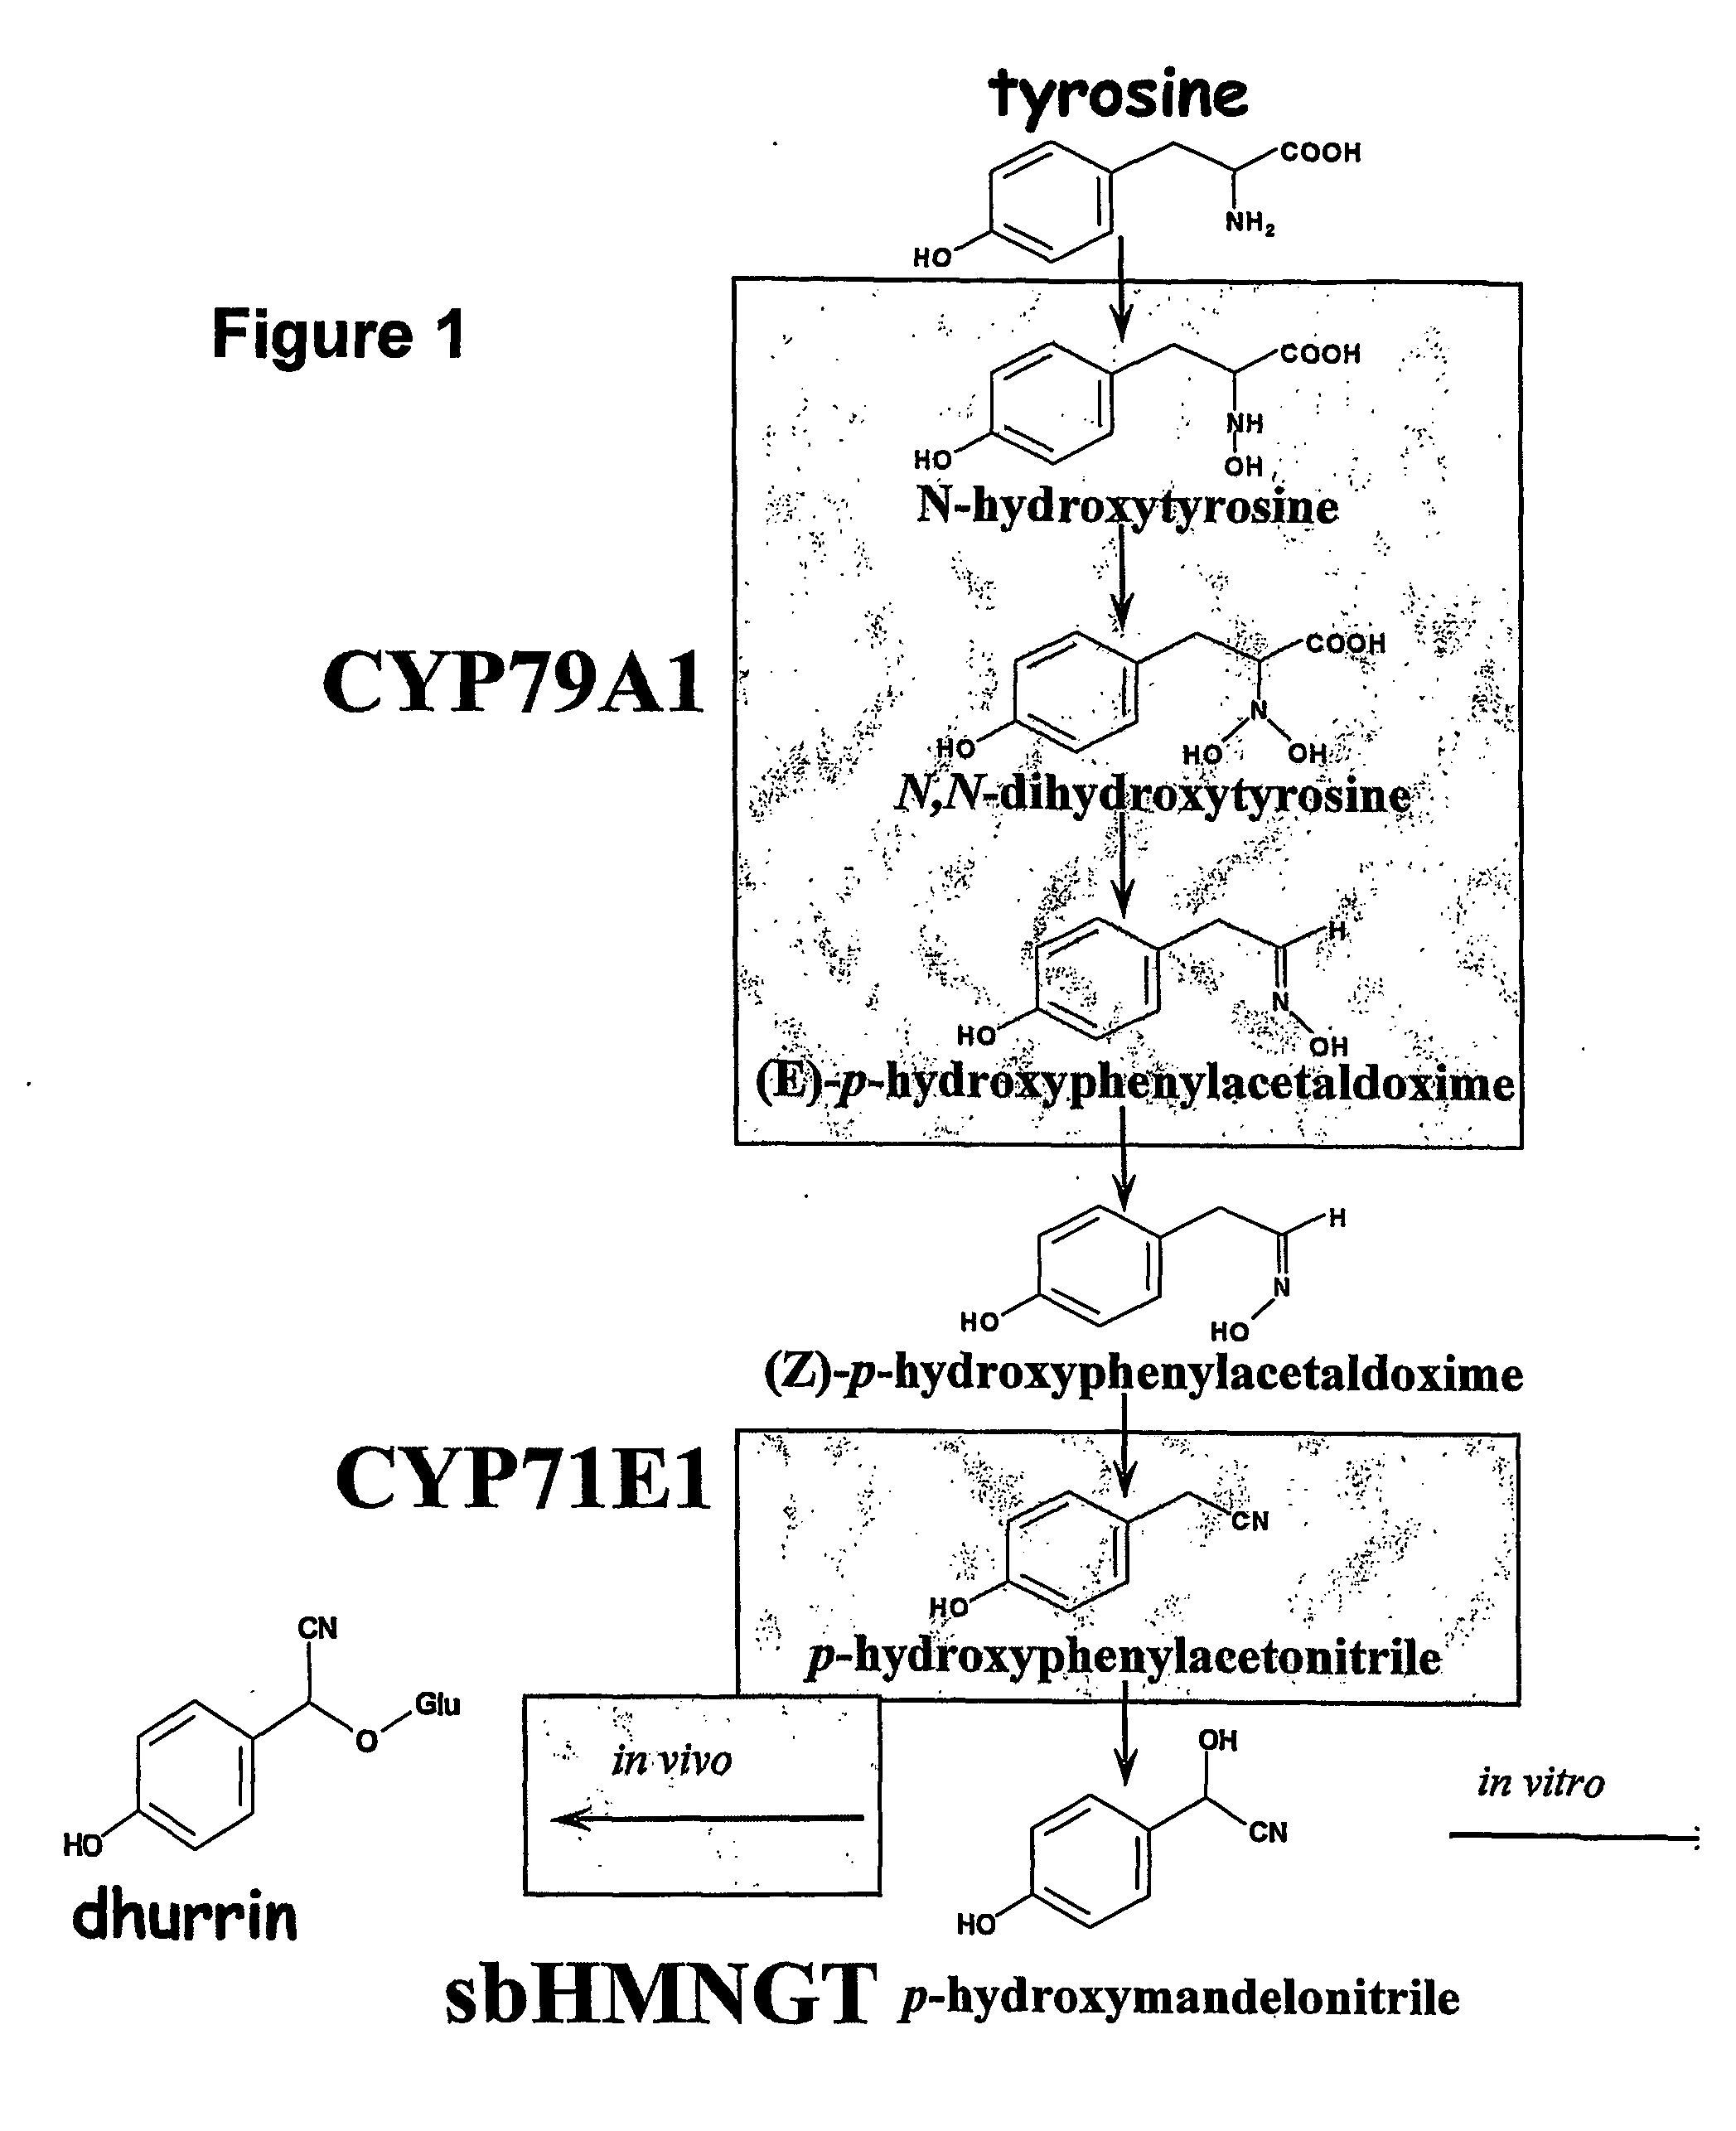 Method of producing a low molecular weight organic compound in a cell